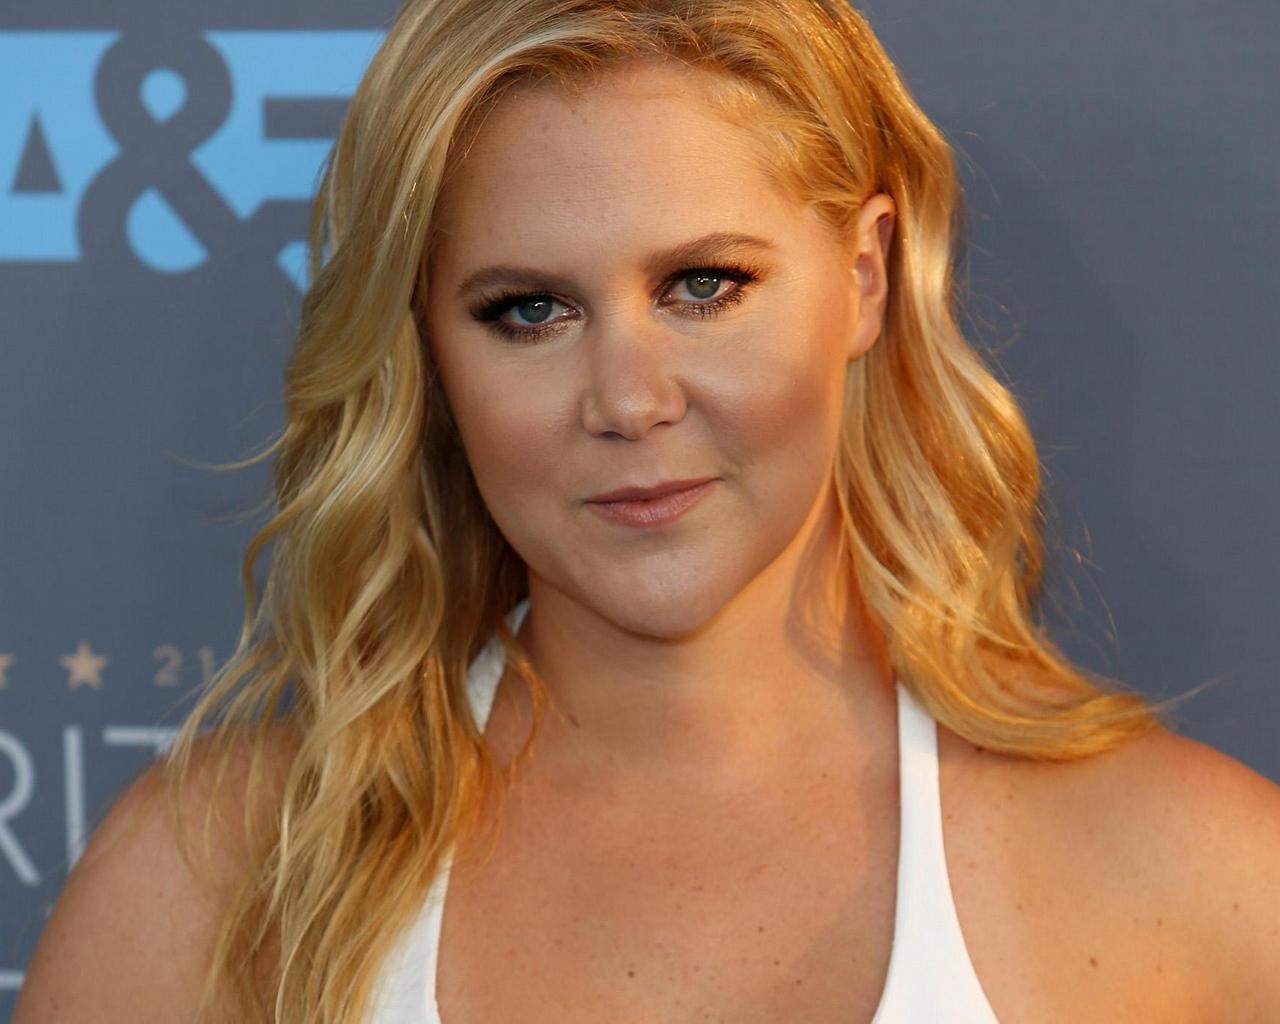 Download wallpaper 1280x1024 amy schumer, actress, face, blonde